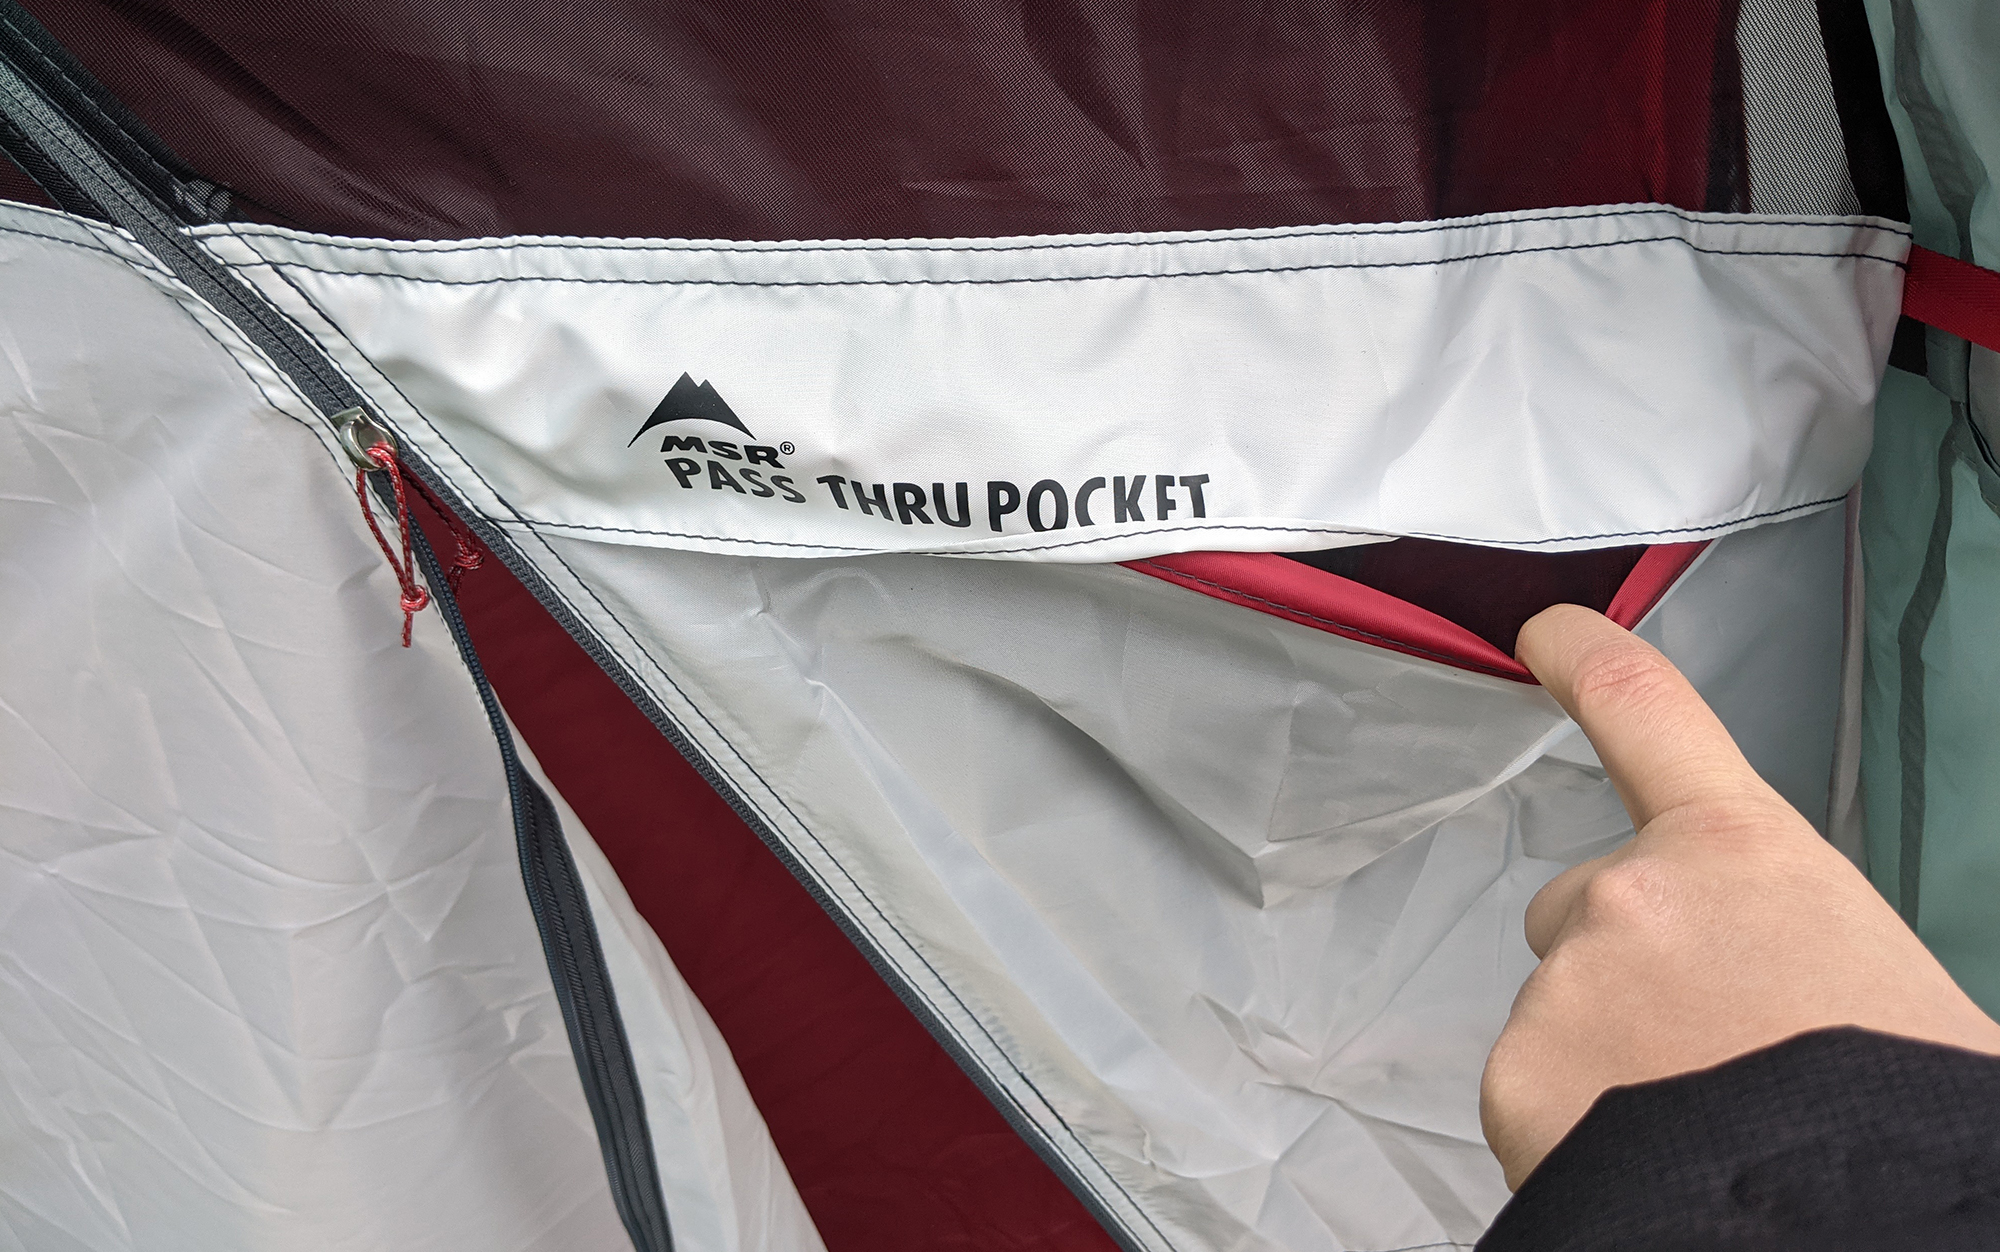 Grabbing your phone, sunglasses, or sunscreen out of the tent just got a lot easier with the MSR Habiscape’s pass-through pocket.